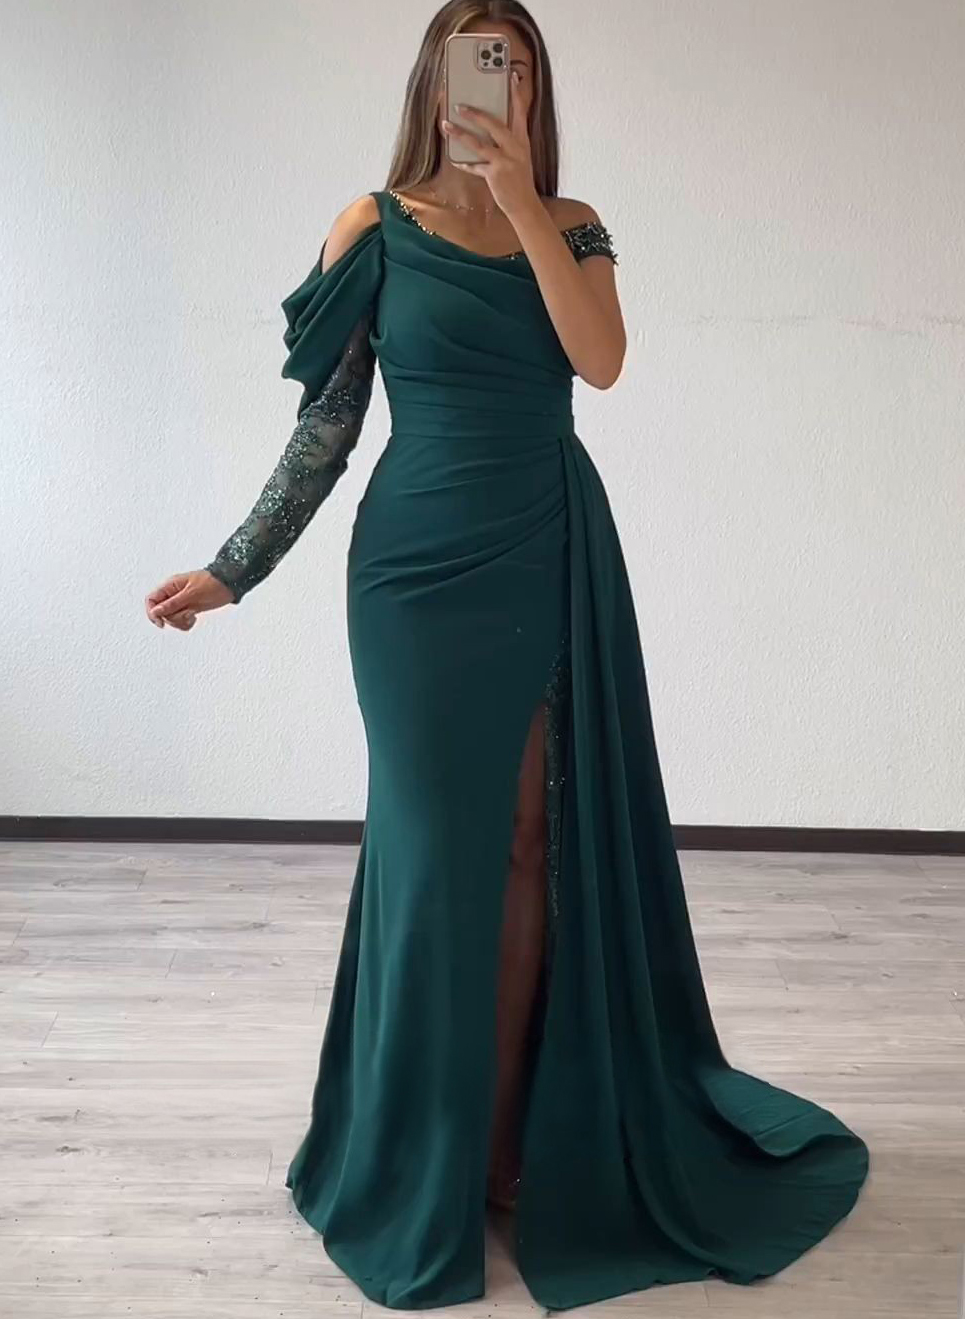 Asymmetrical Neck Long Sleeves Lace Evening Dresses